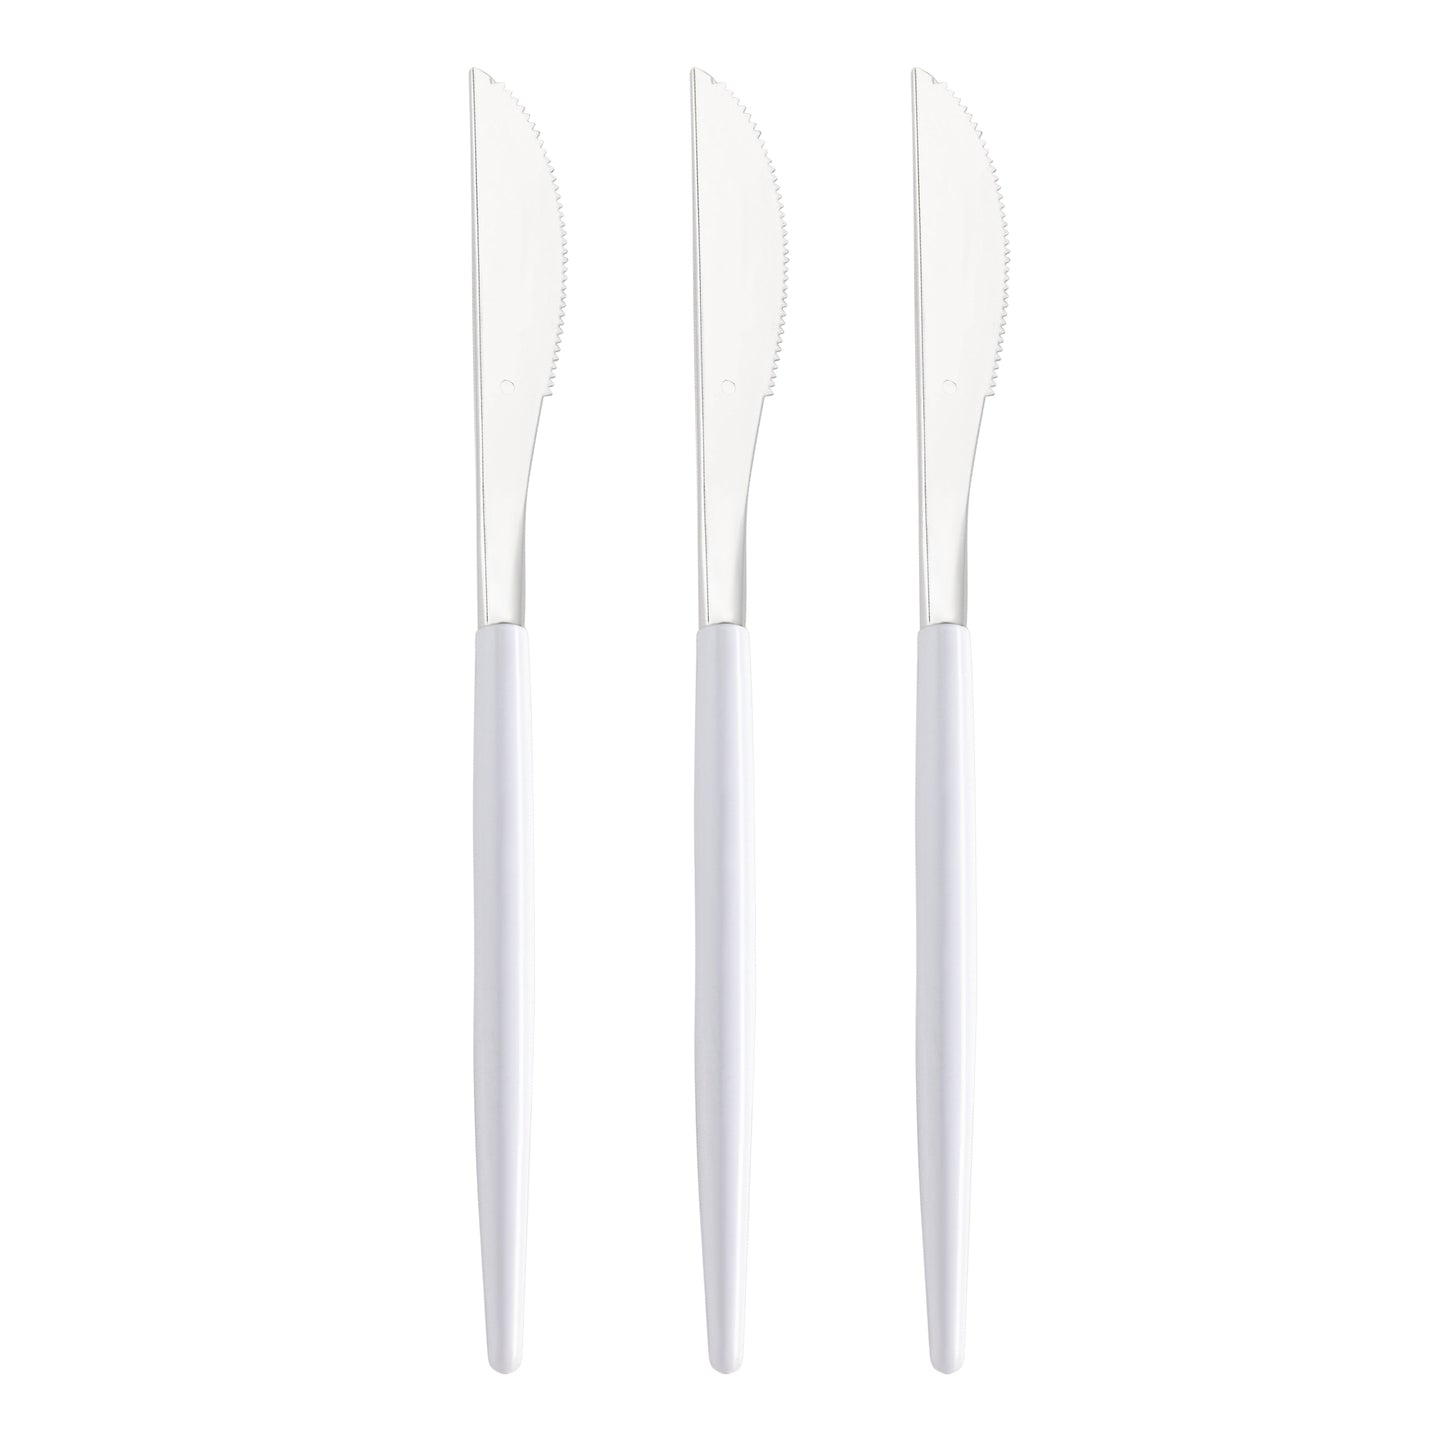 Shiny Silver with White Handle Moderno Disposable Plastic Dinner Knives